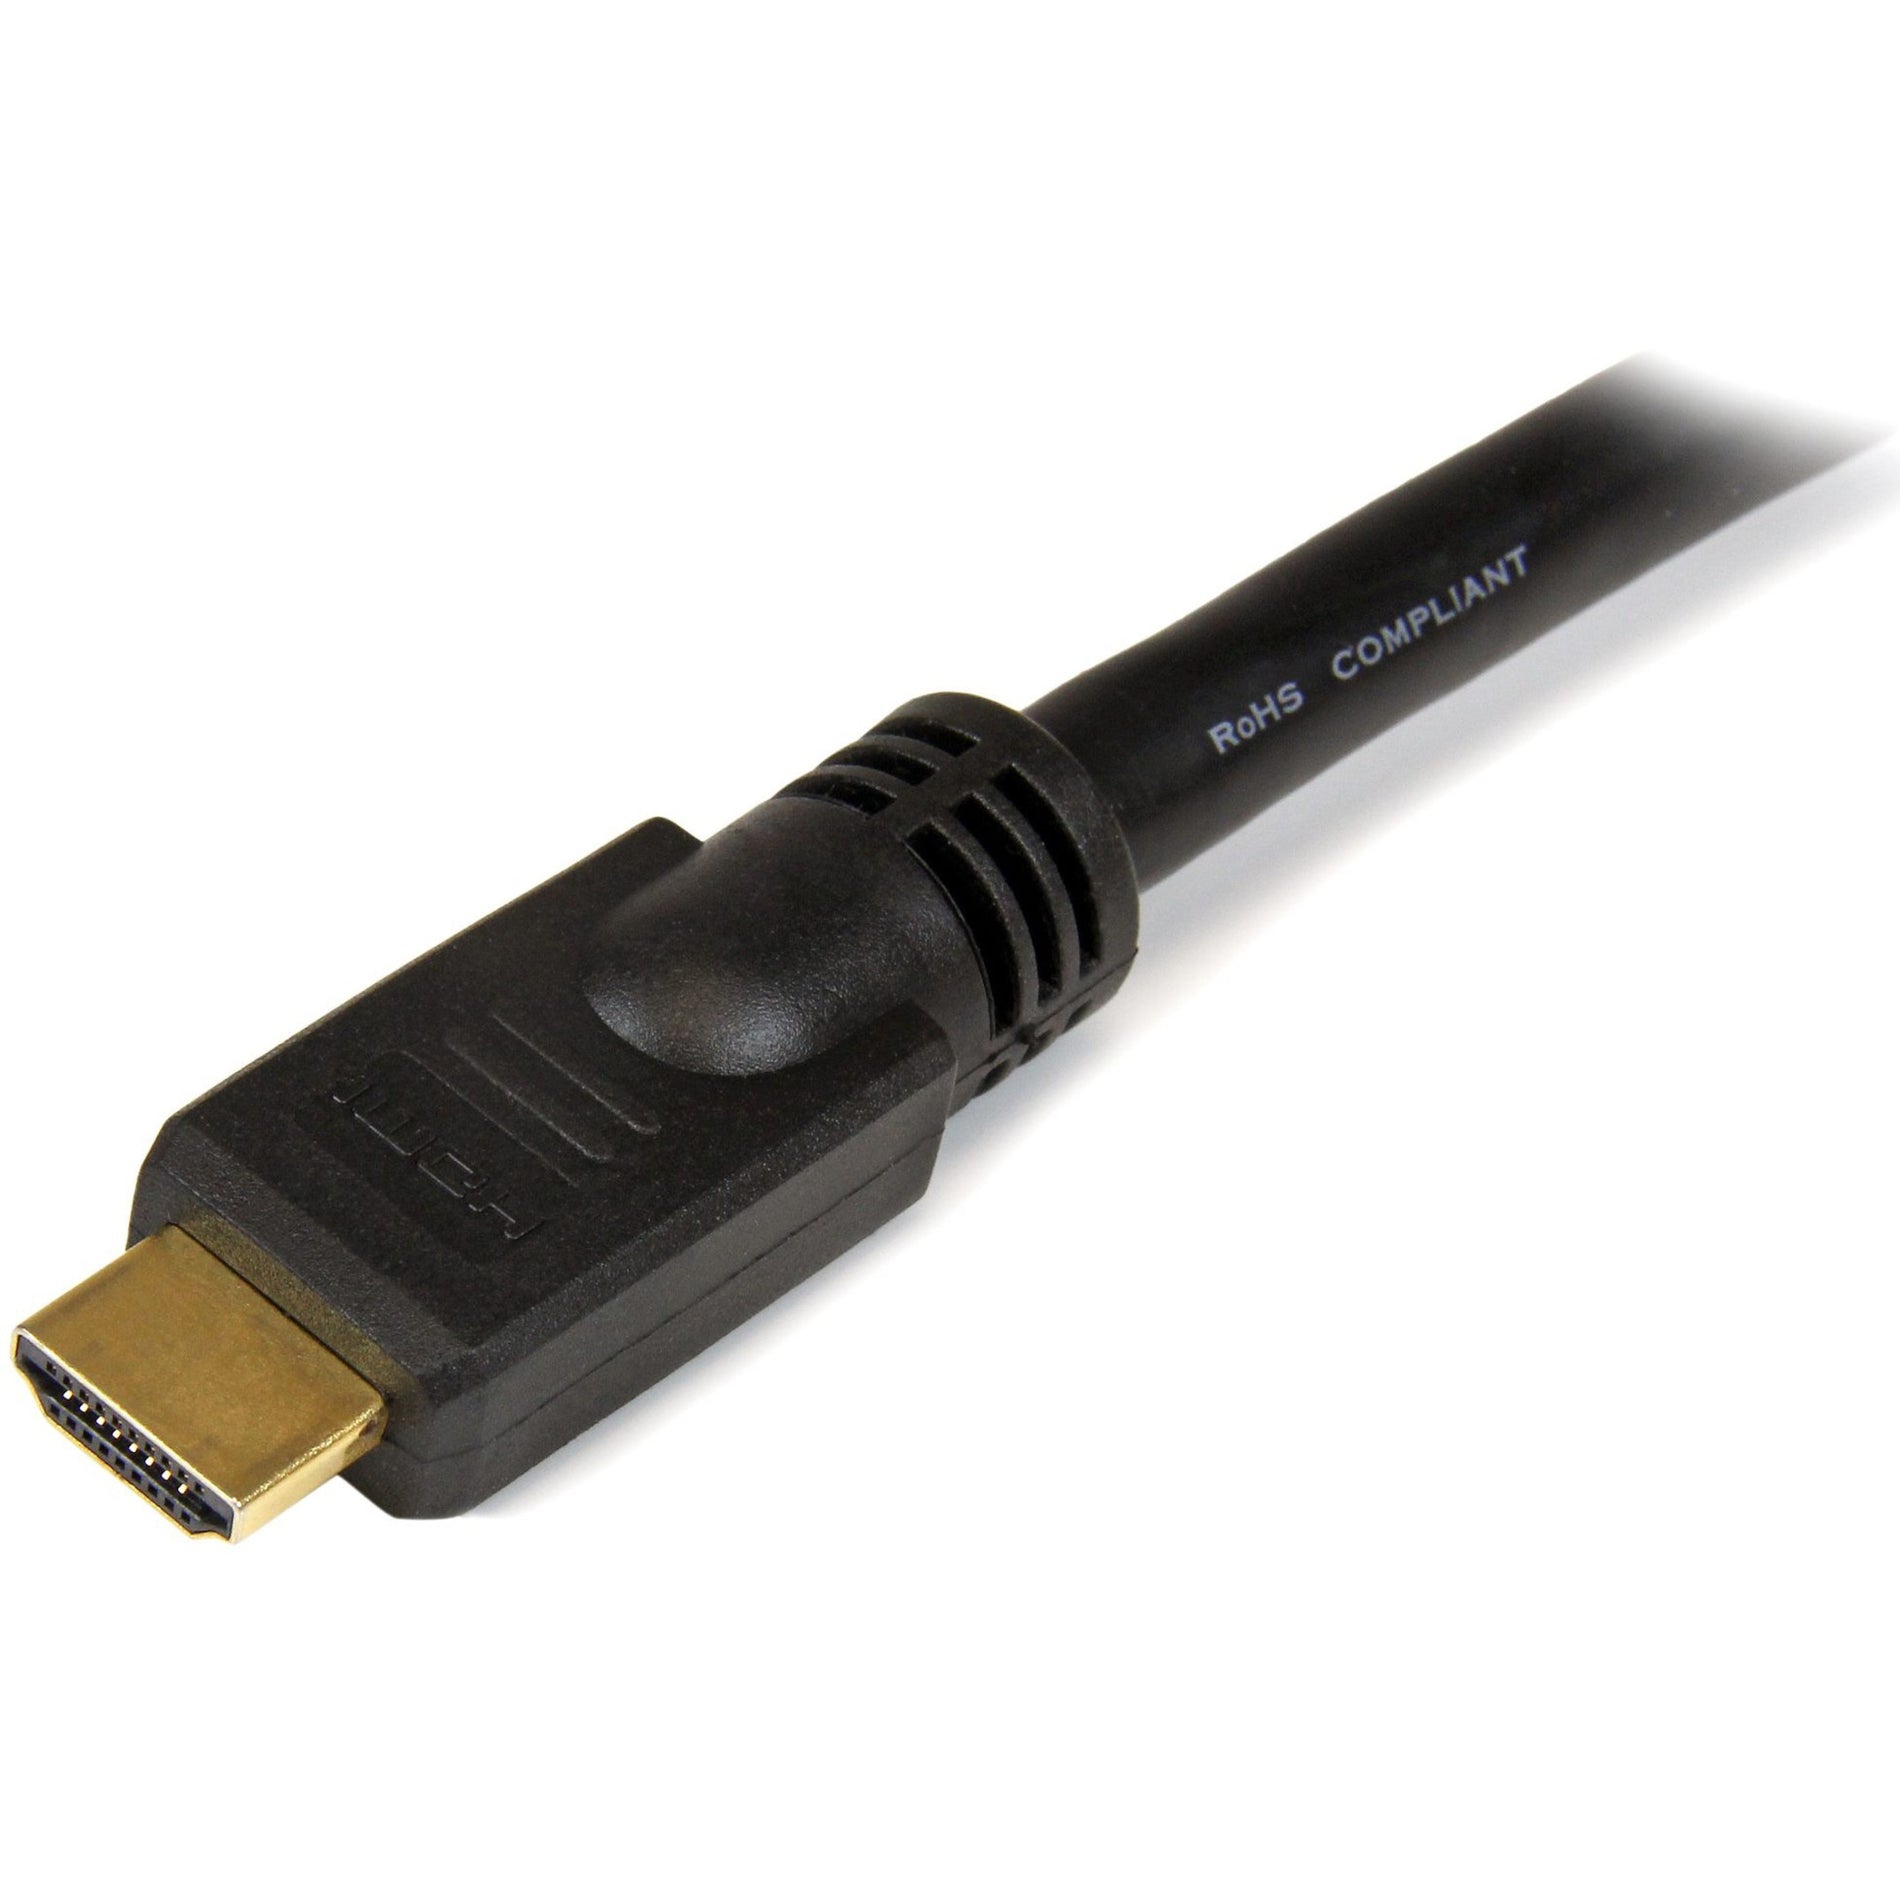 StarTech.com HDMM20 20 ft High Speed HDMI Cable - Ultra HD 4k x 2k HDMI Cable, Molded, Gold Plated Connectors, Black